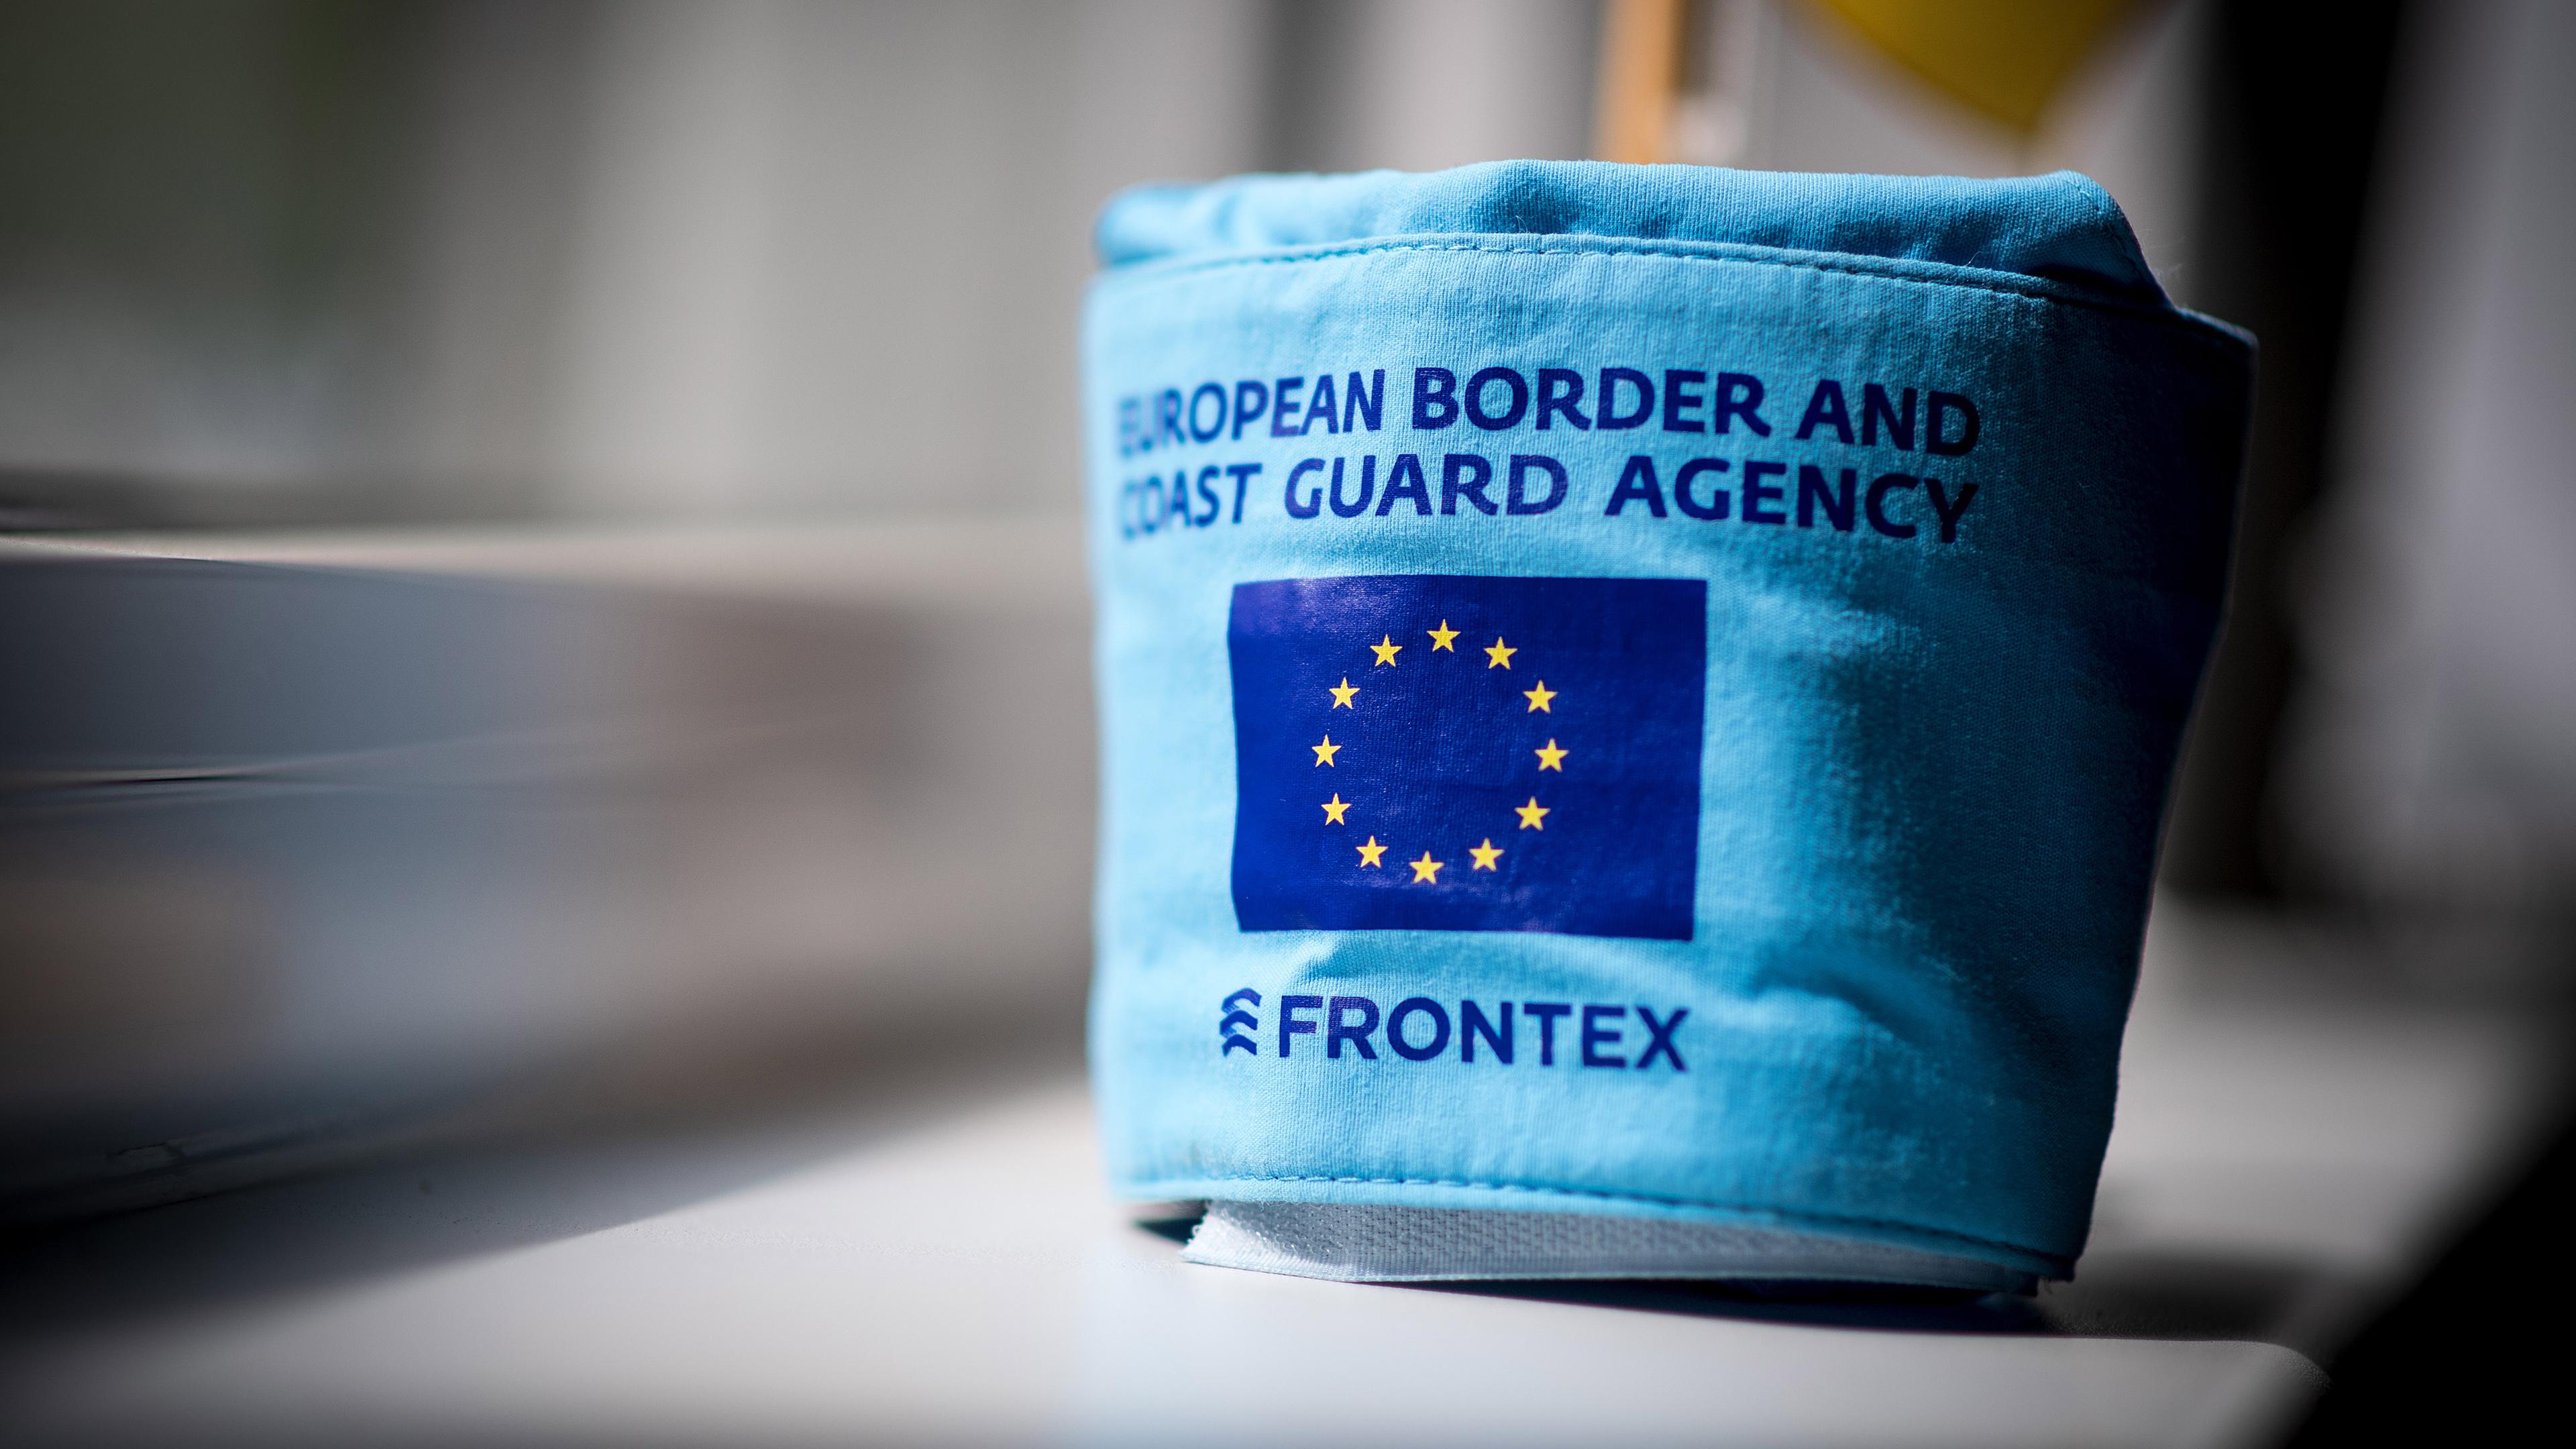 Typical: Frontex